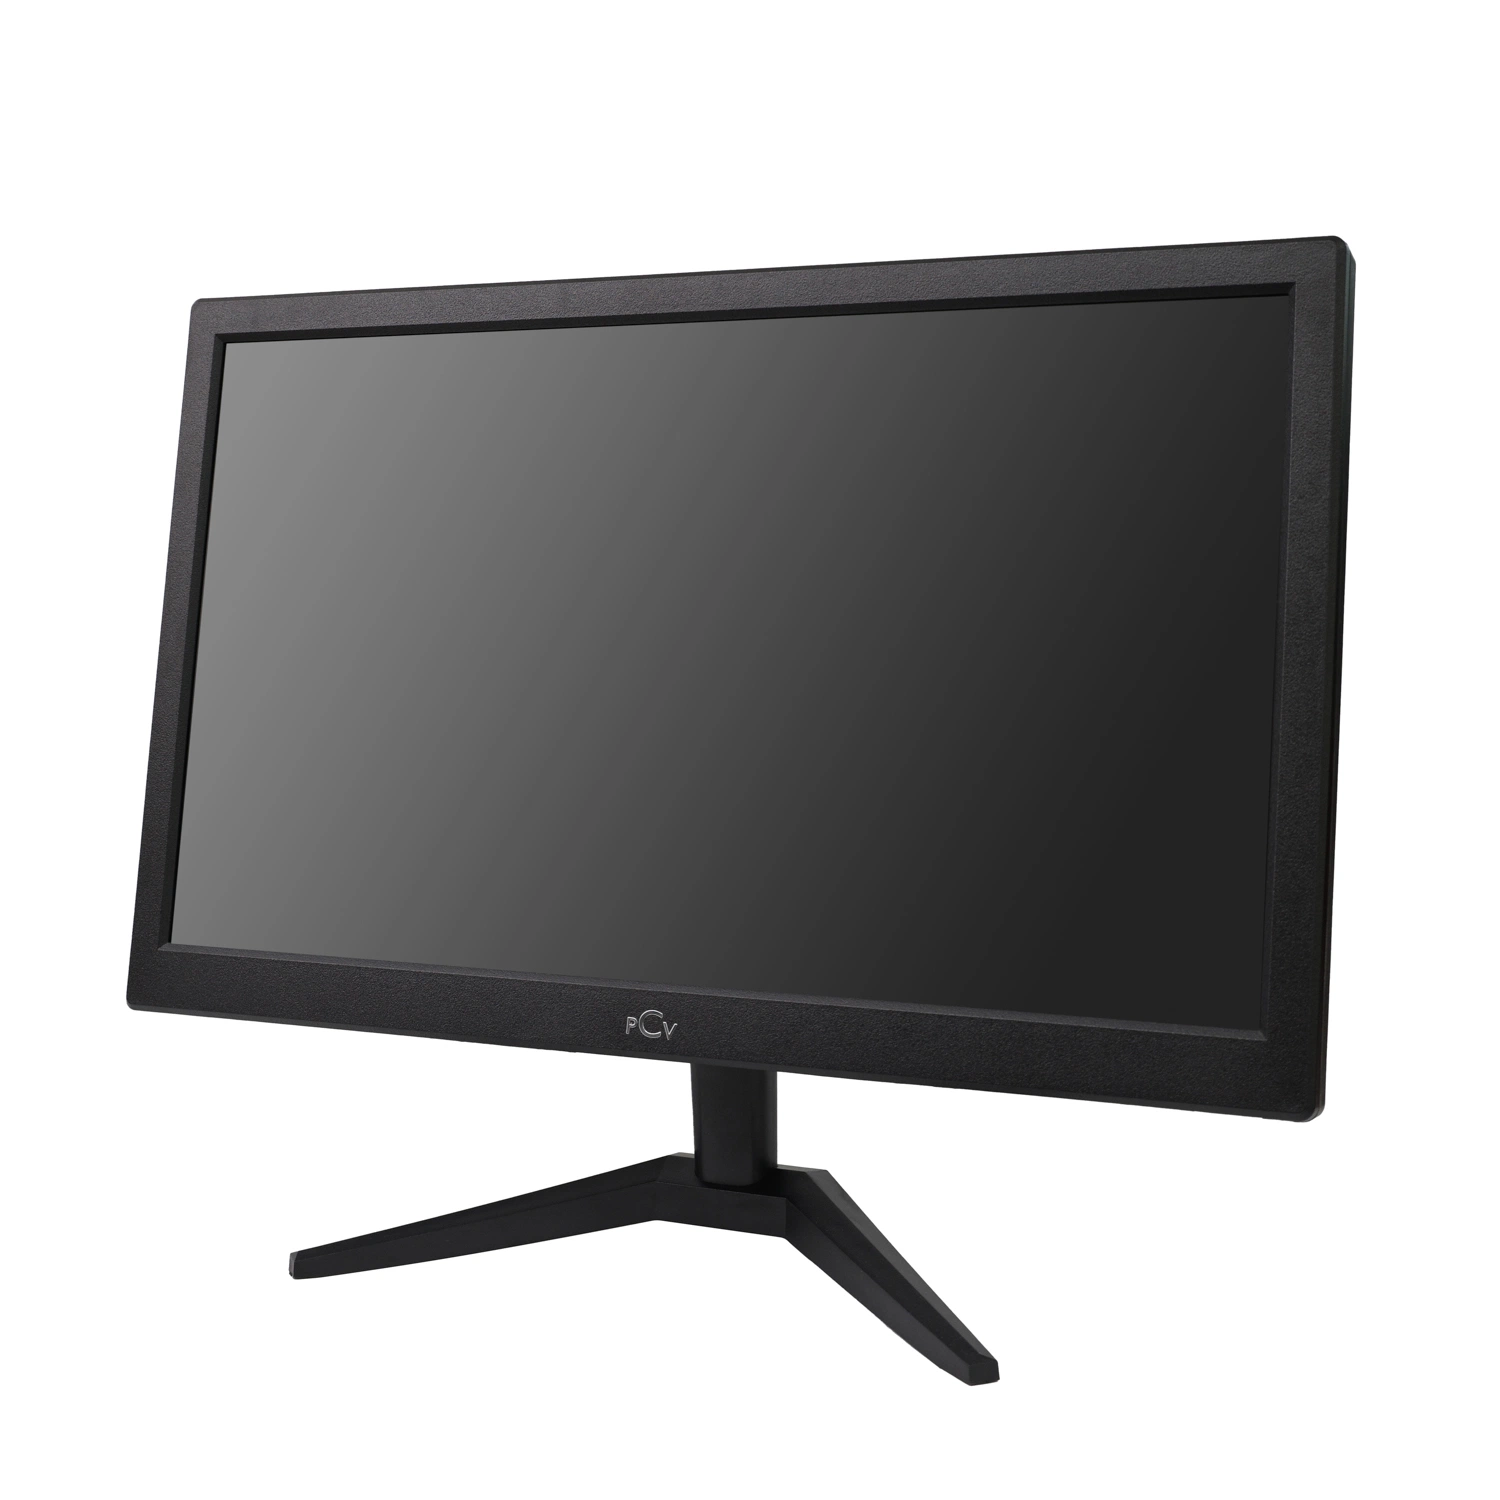 Wholesale/Supplier Price 17 18.5 19 22 23 24inch LED LCD Computer Monitors CCTV Monitor Portable Monitor PC Computer with VGA HDMI for Home Office